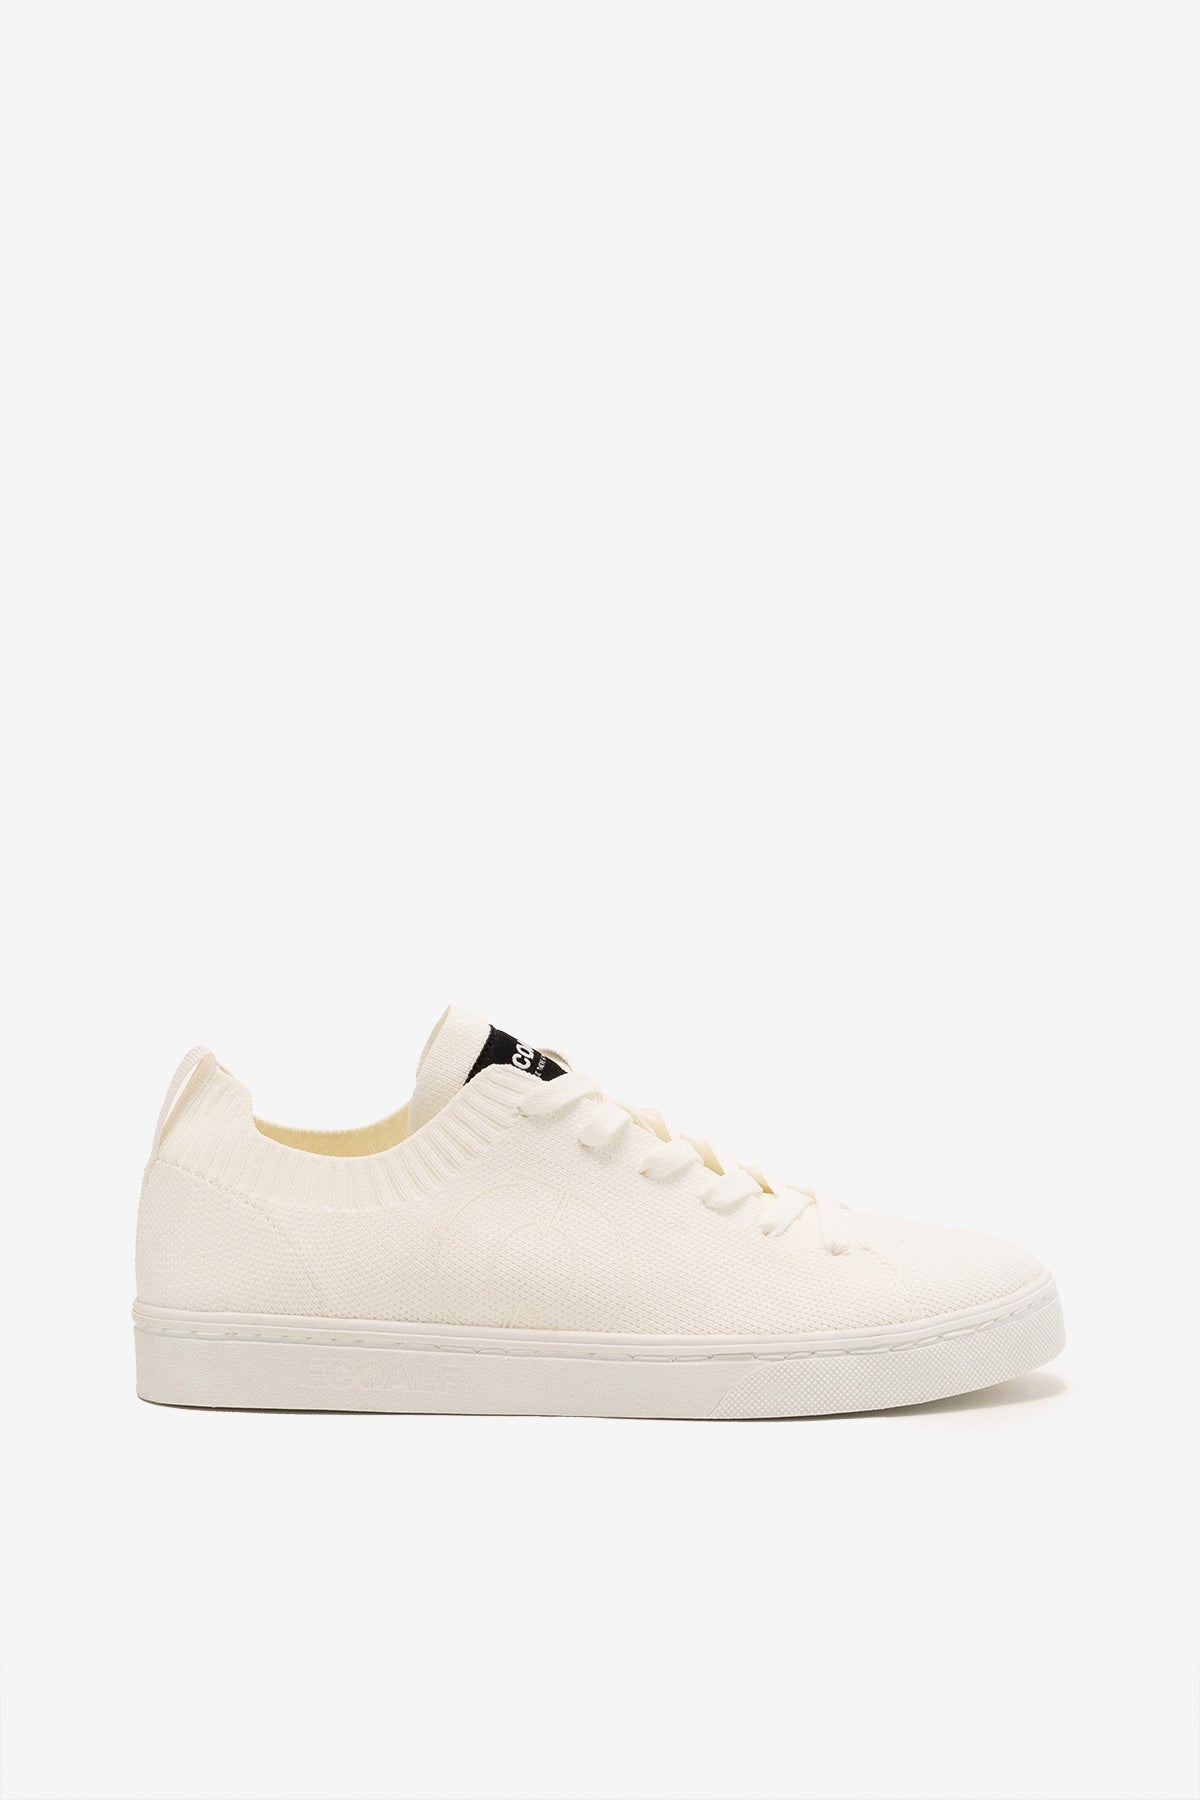 CHAUSSURES JERSEY BLANCHES